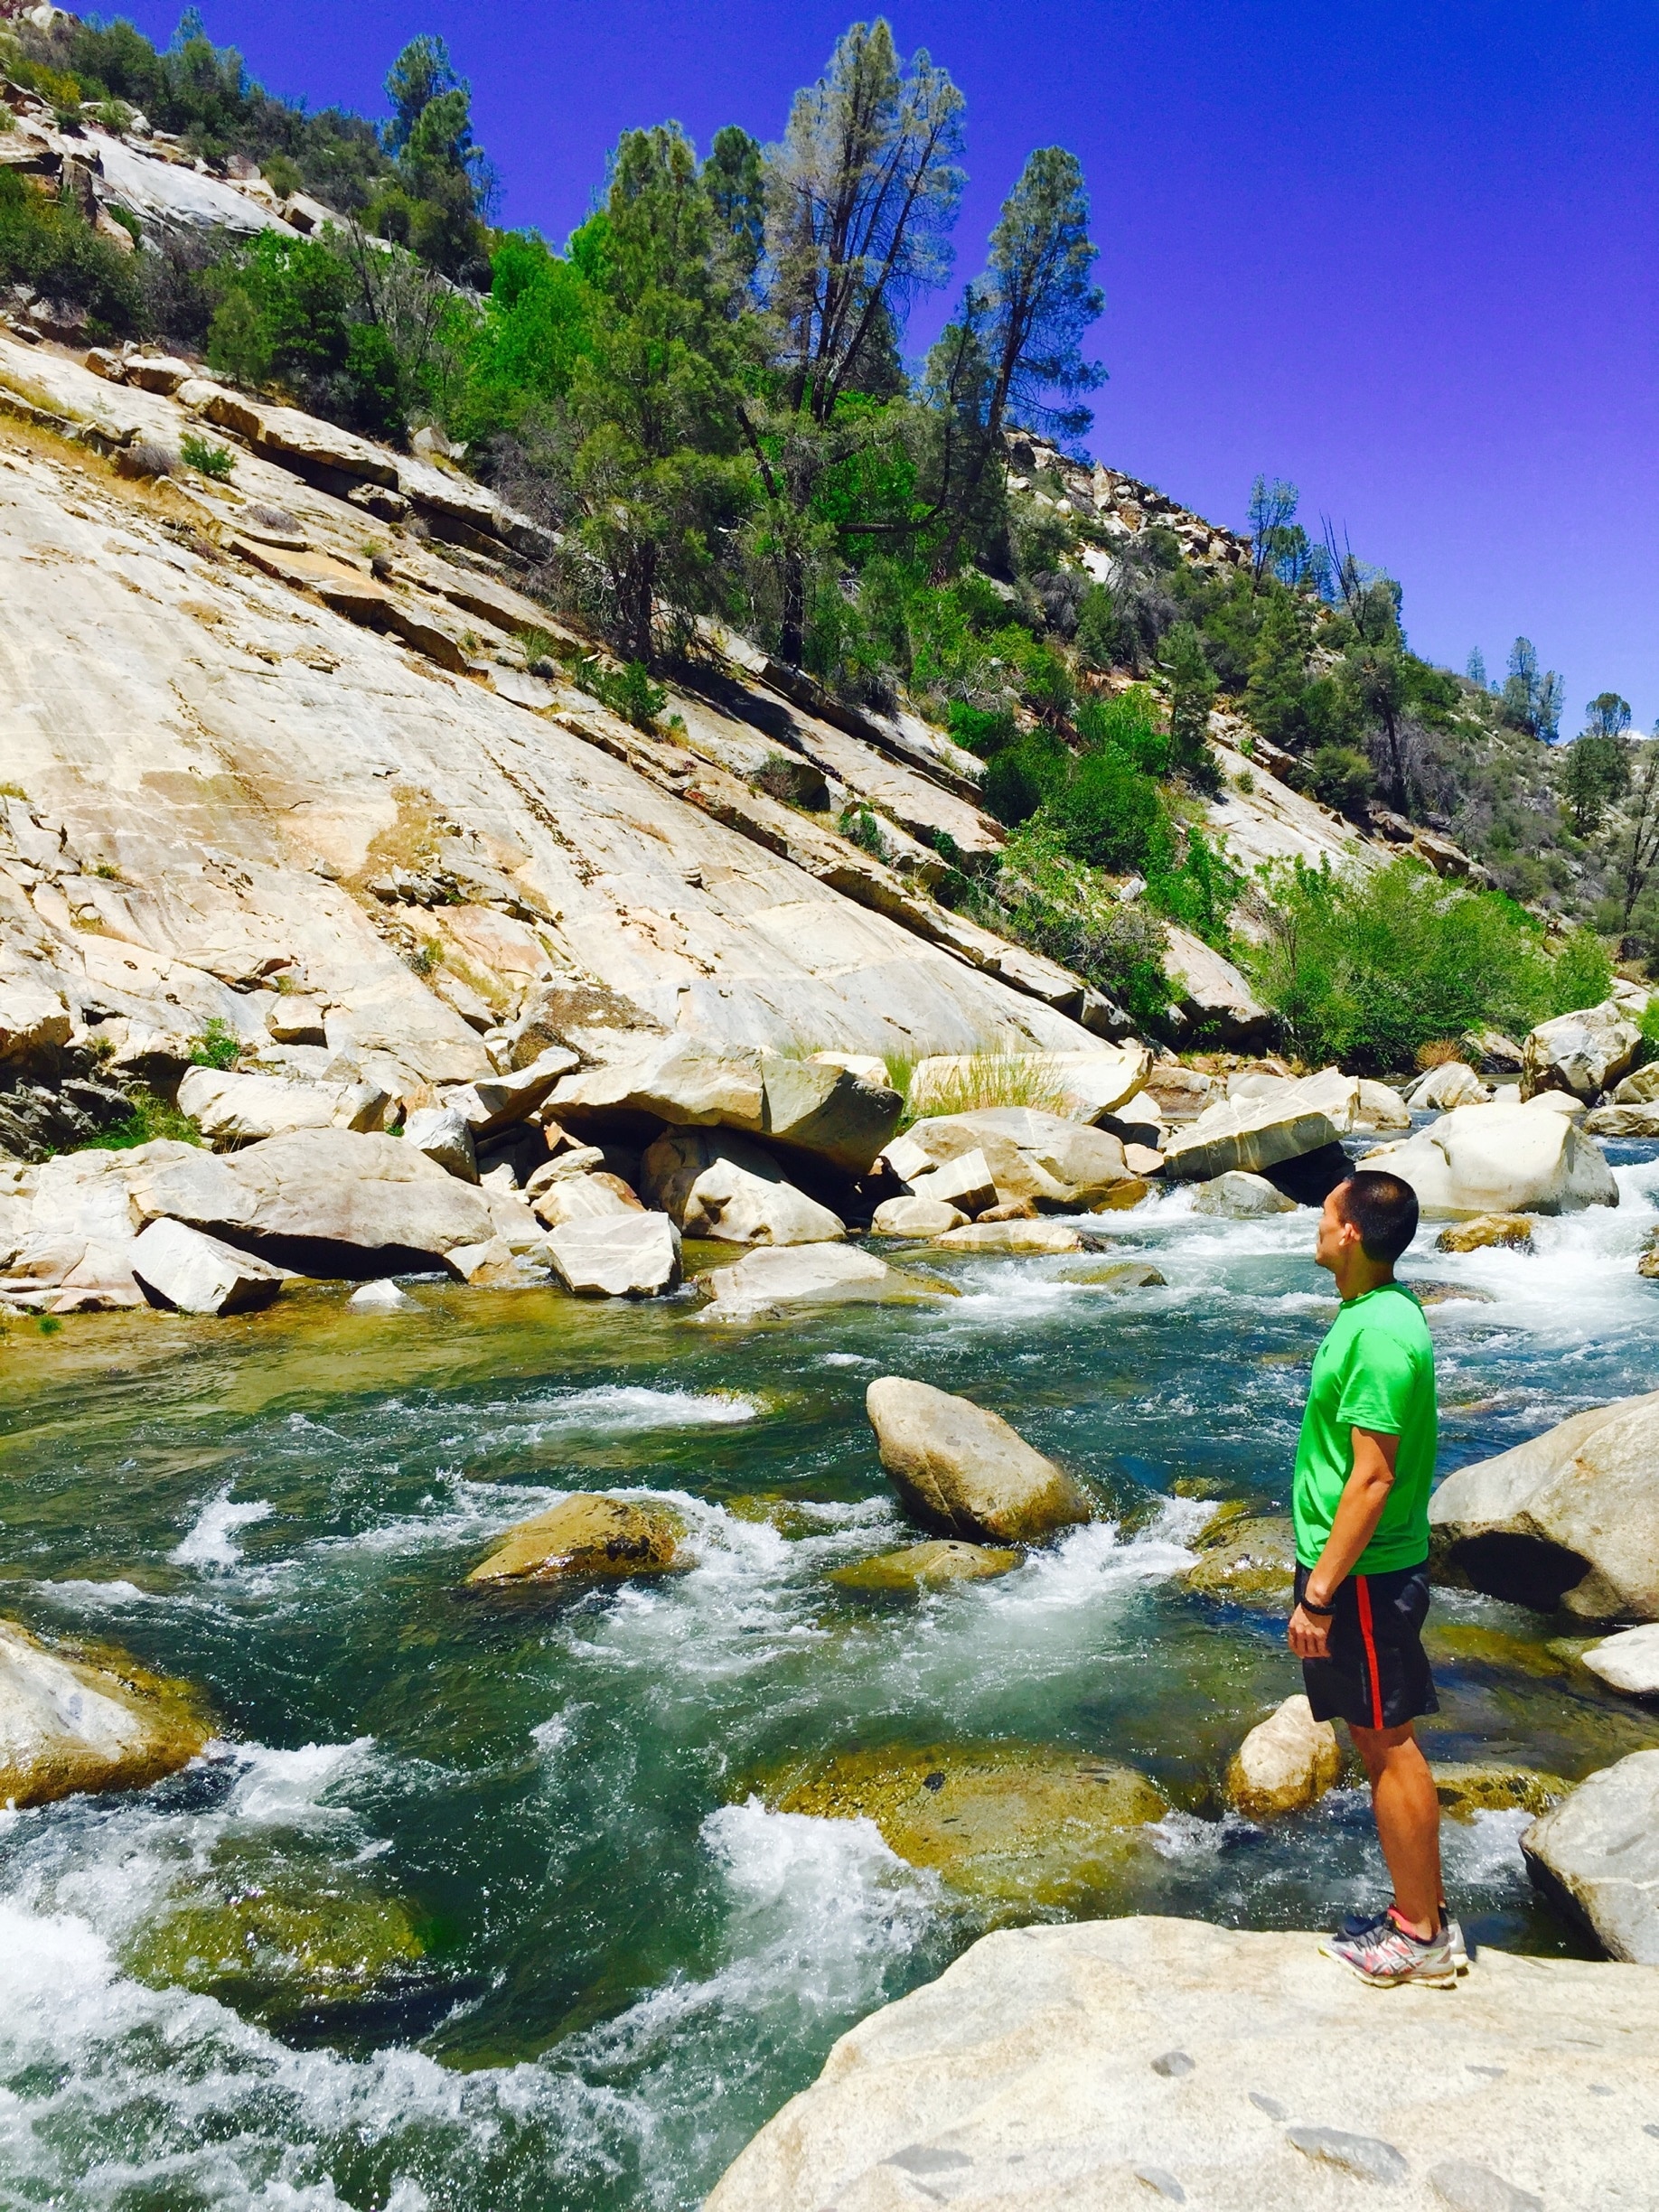 Kernville, CA 
Though, the water is low--nothing stops a hiker from continuing his journey. #hiking #nature #adventure 